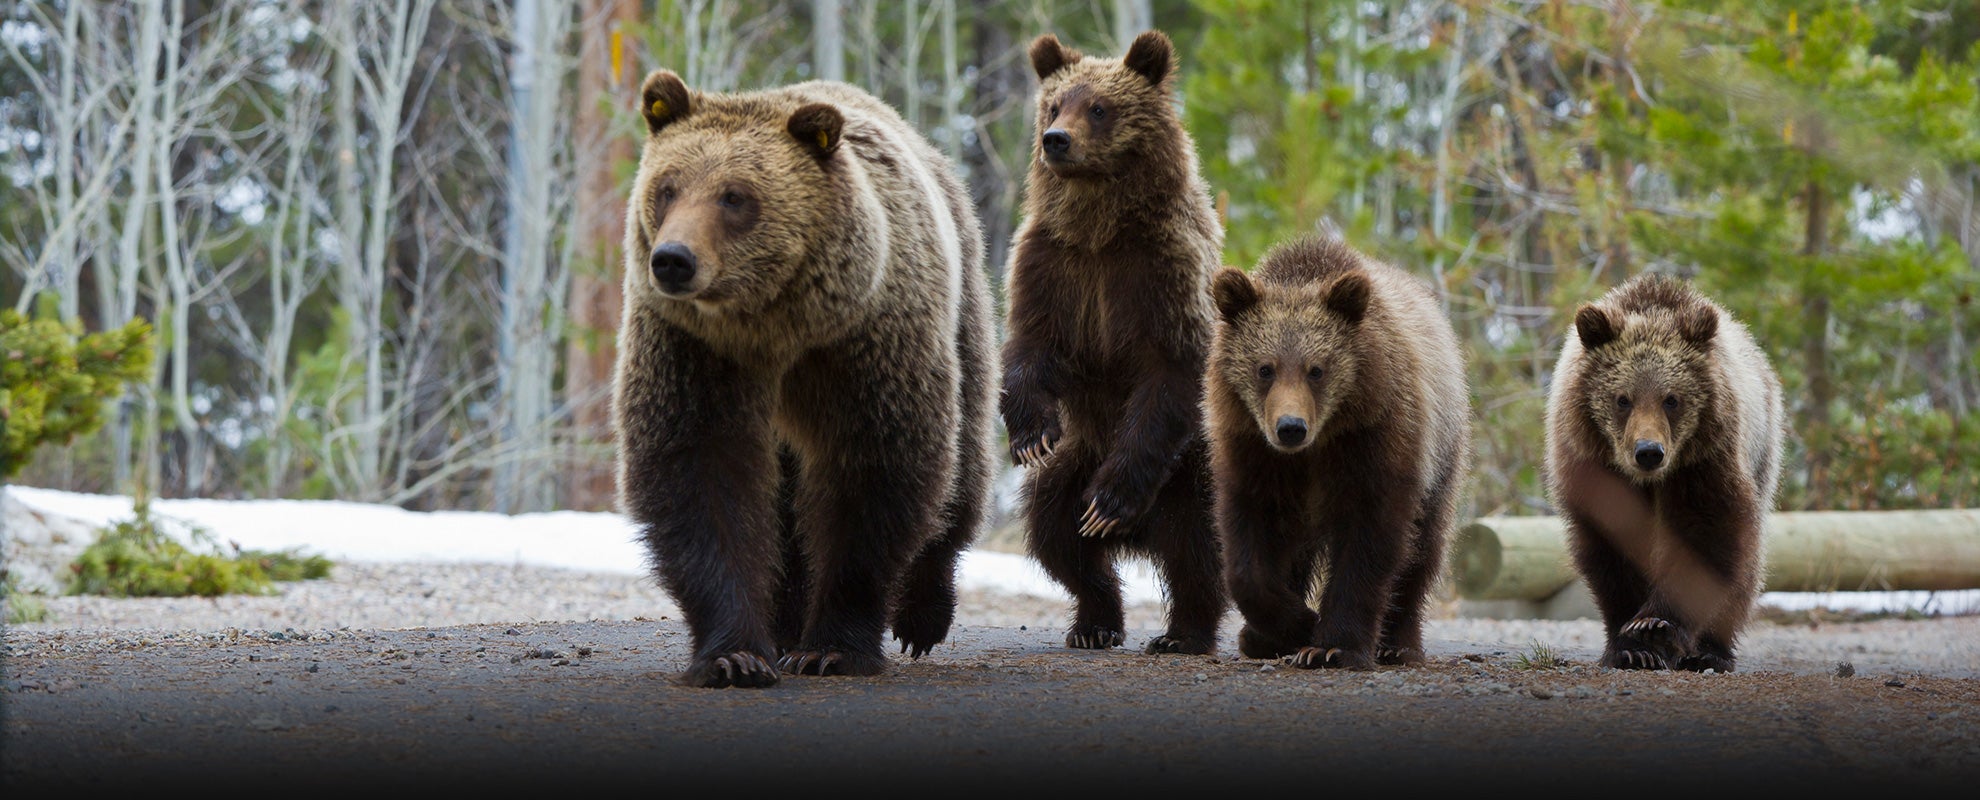 Grizzly 610 walks down a park road with her three cubs in springtime.